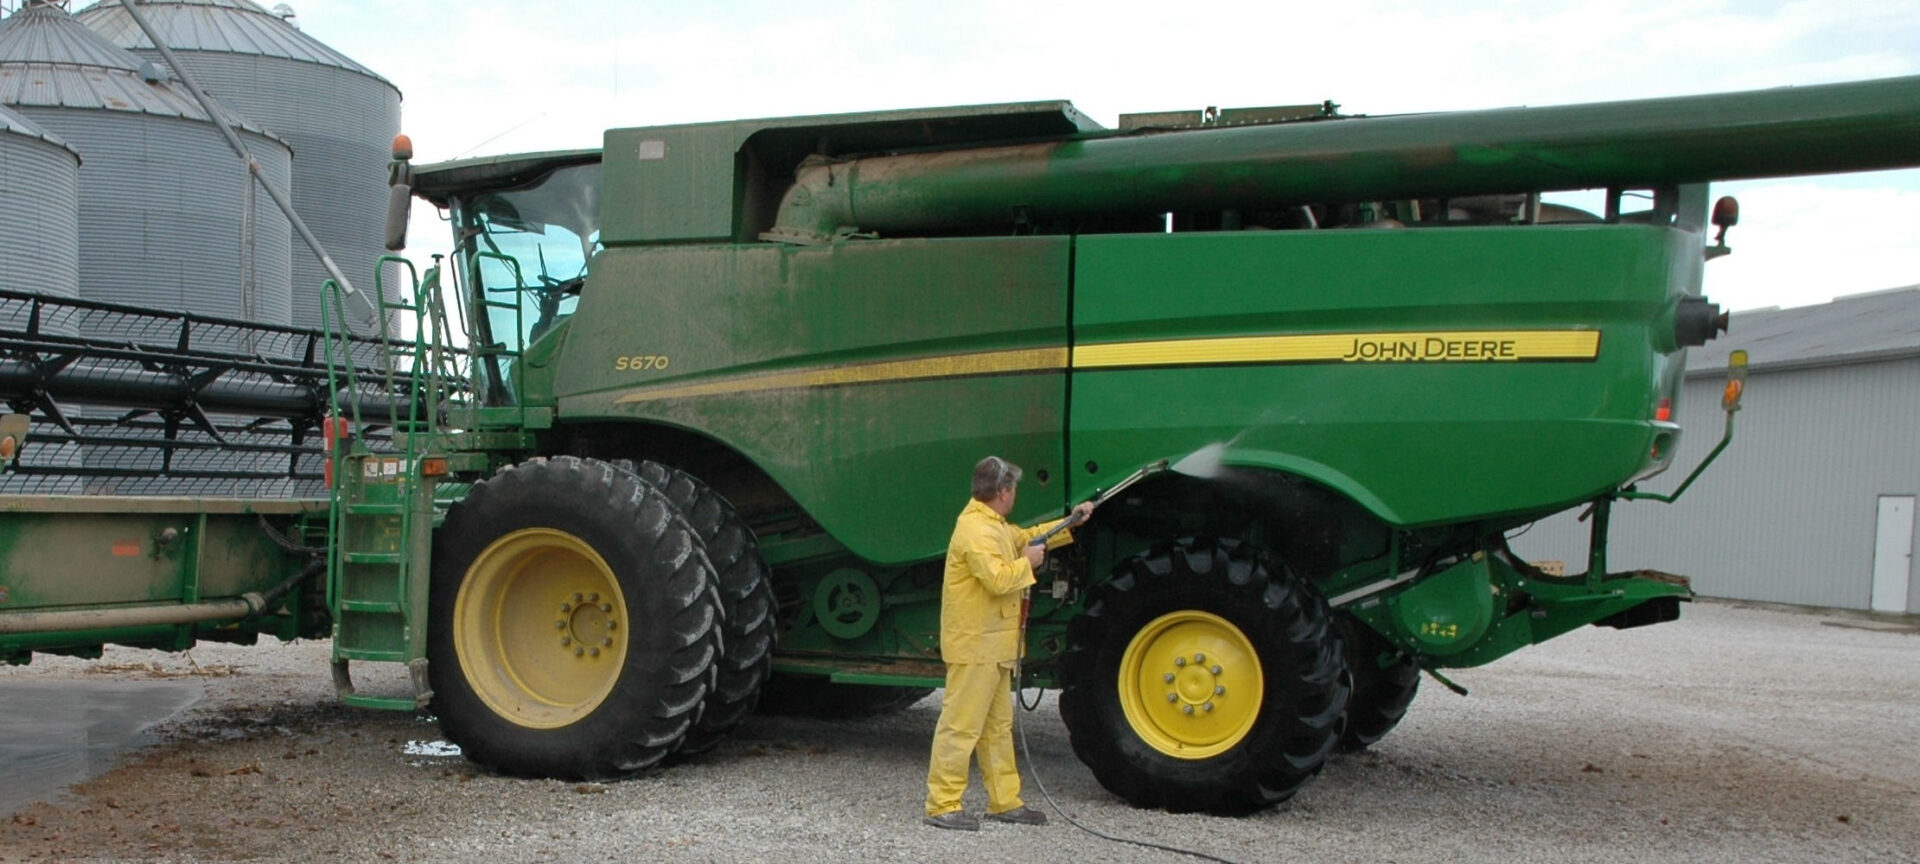 A person using a power washer to clean a large vehicle